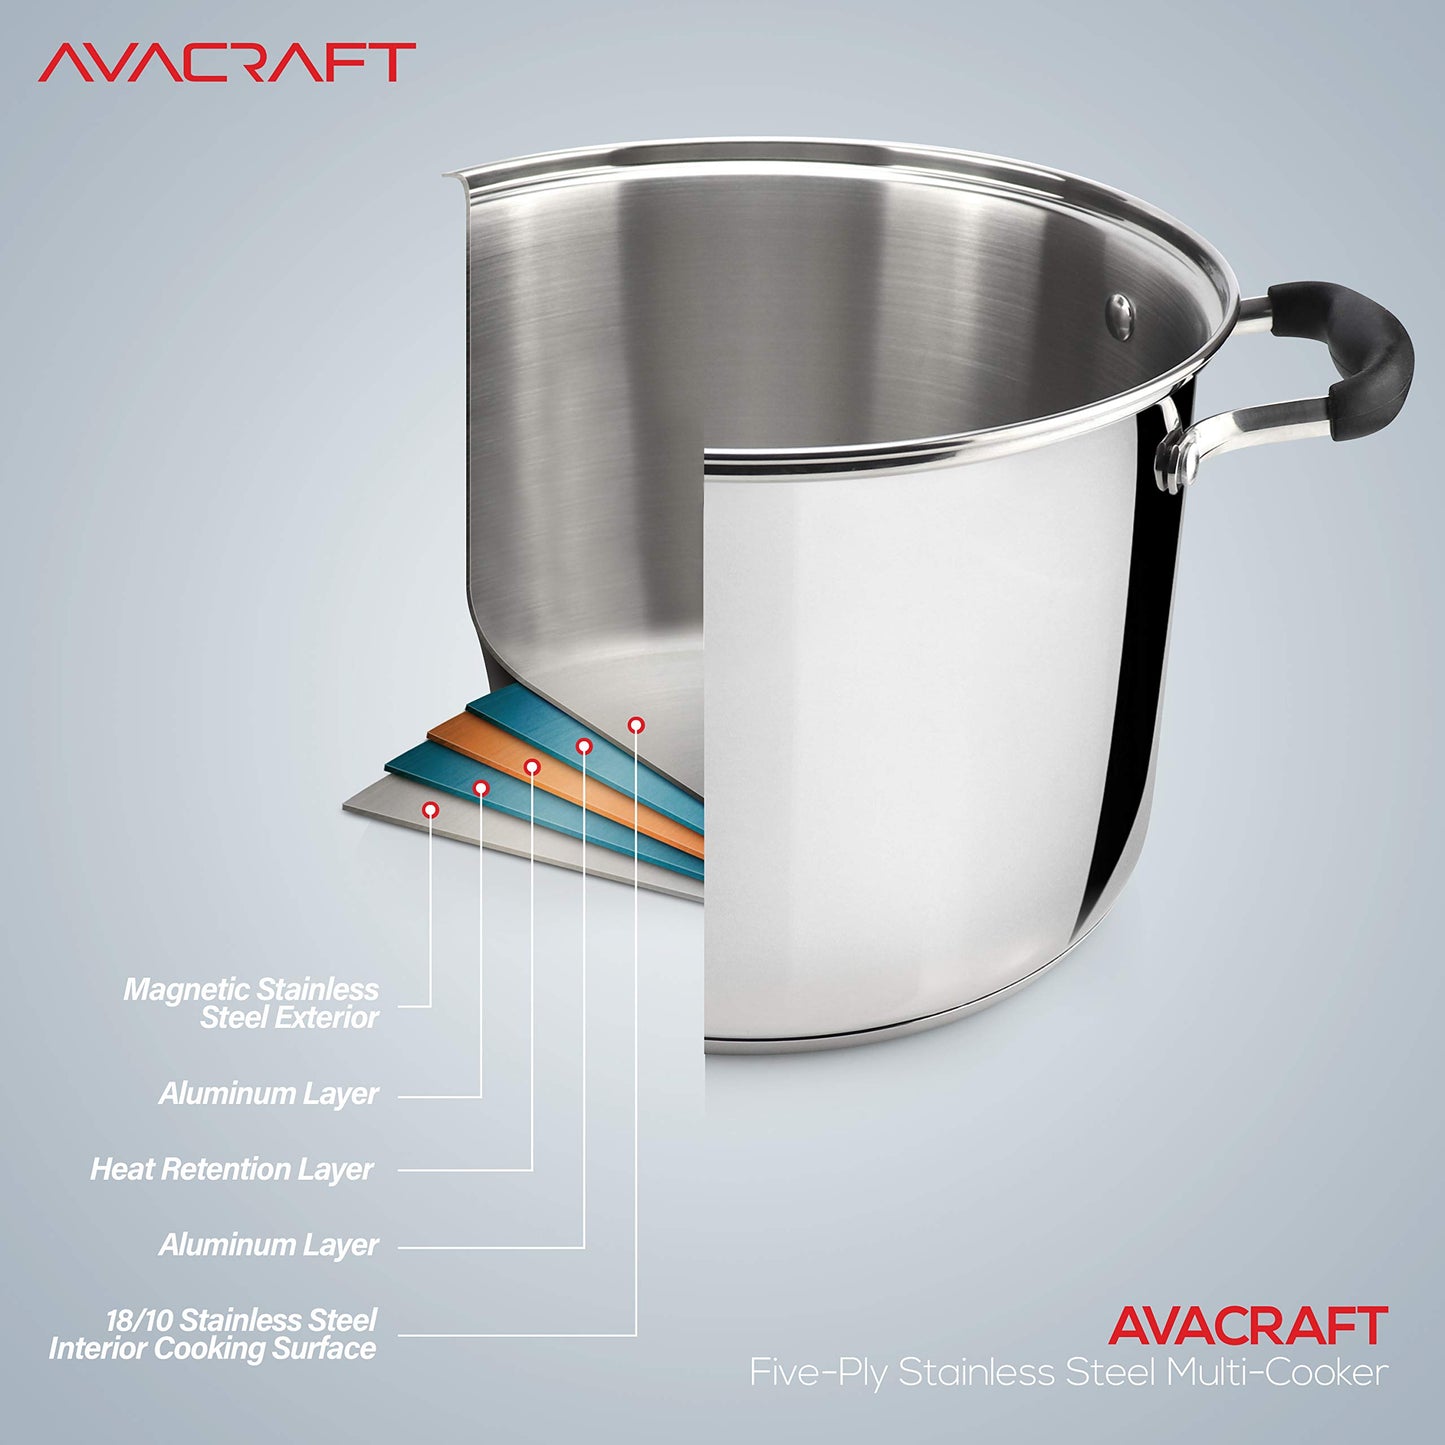 AVACRAFT 18/10 Stainless Steel, 4 Piece Pasta Pot with Strainer Insert, Stock Pot with Steamer Basket and Pasta Pot Insert, Pasta Cooker Set with Glass Lid, 7 Quart